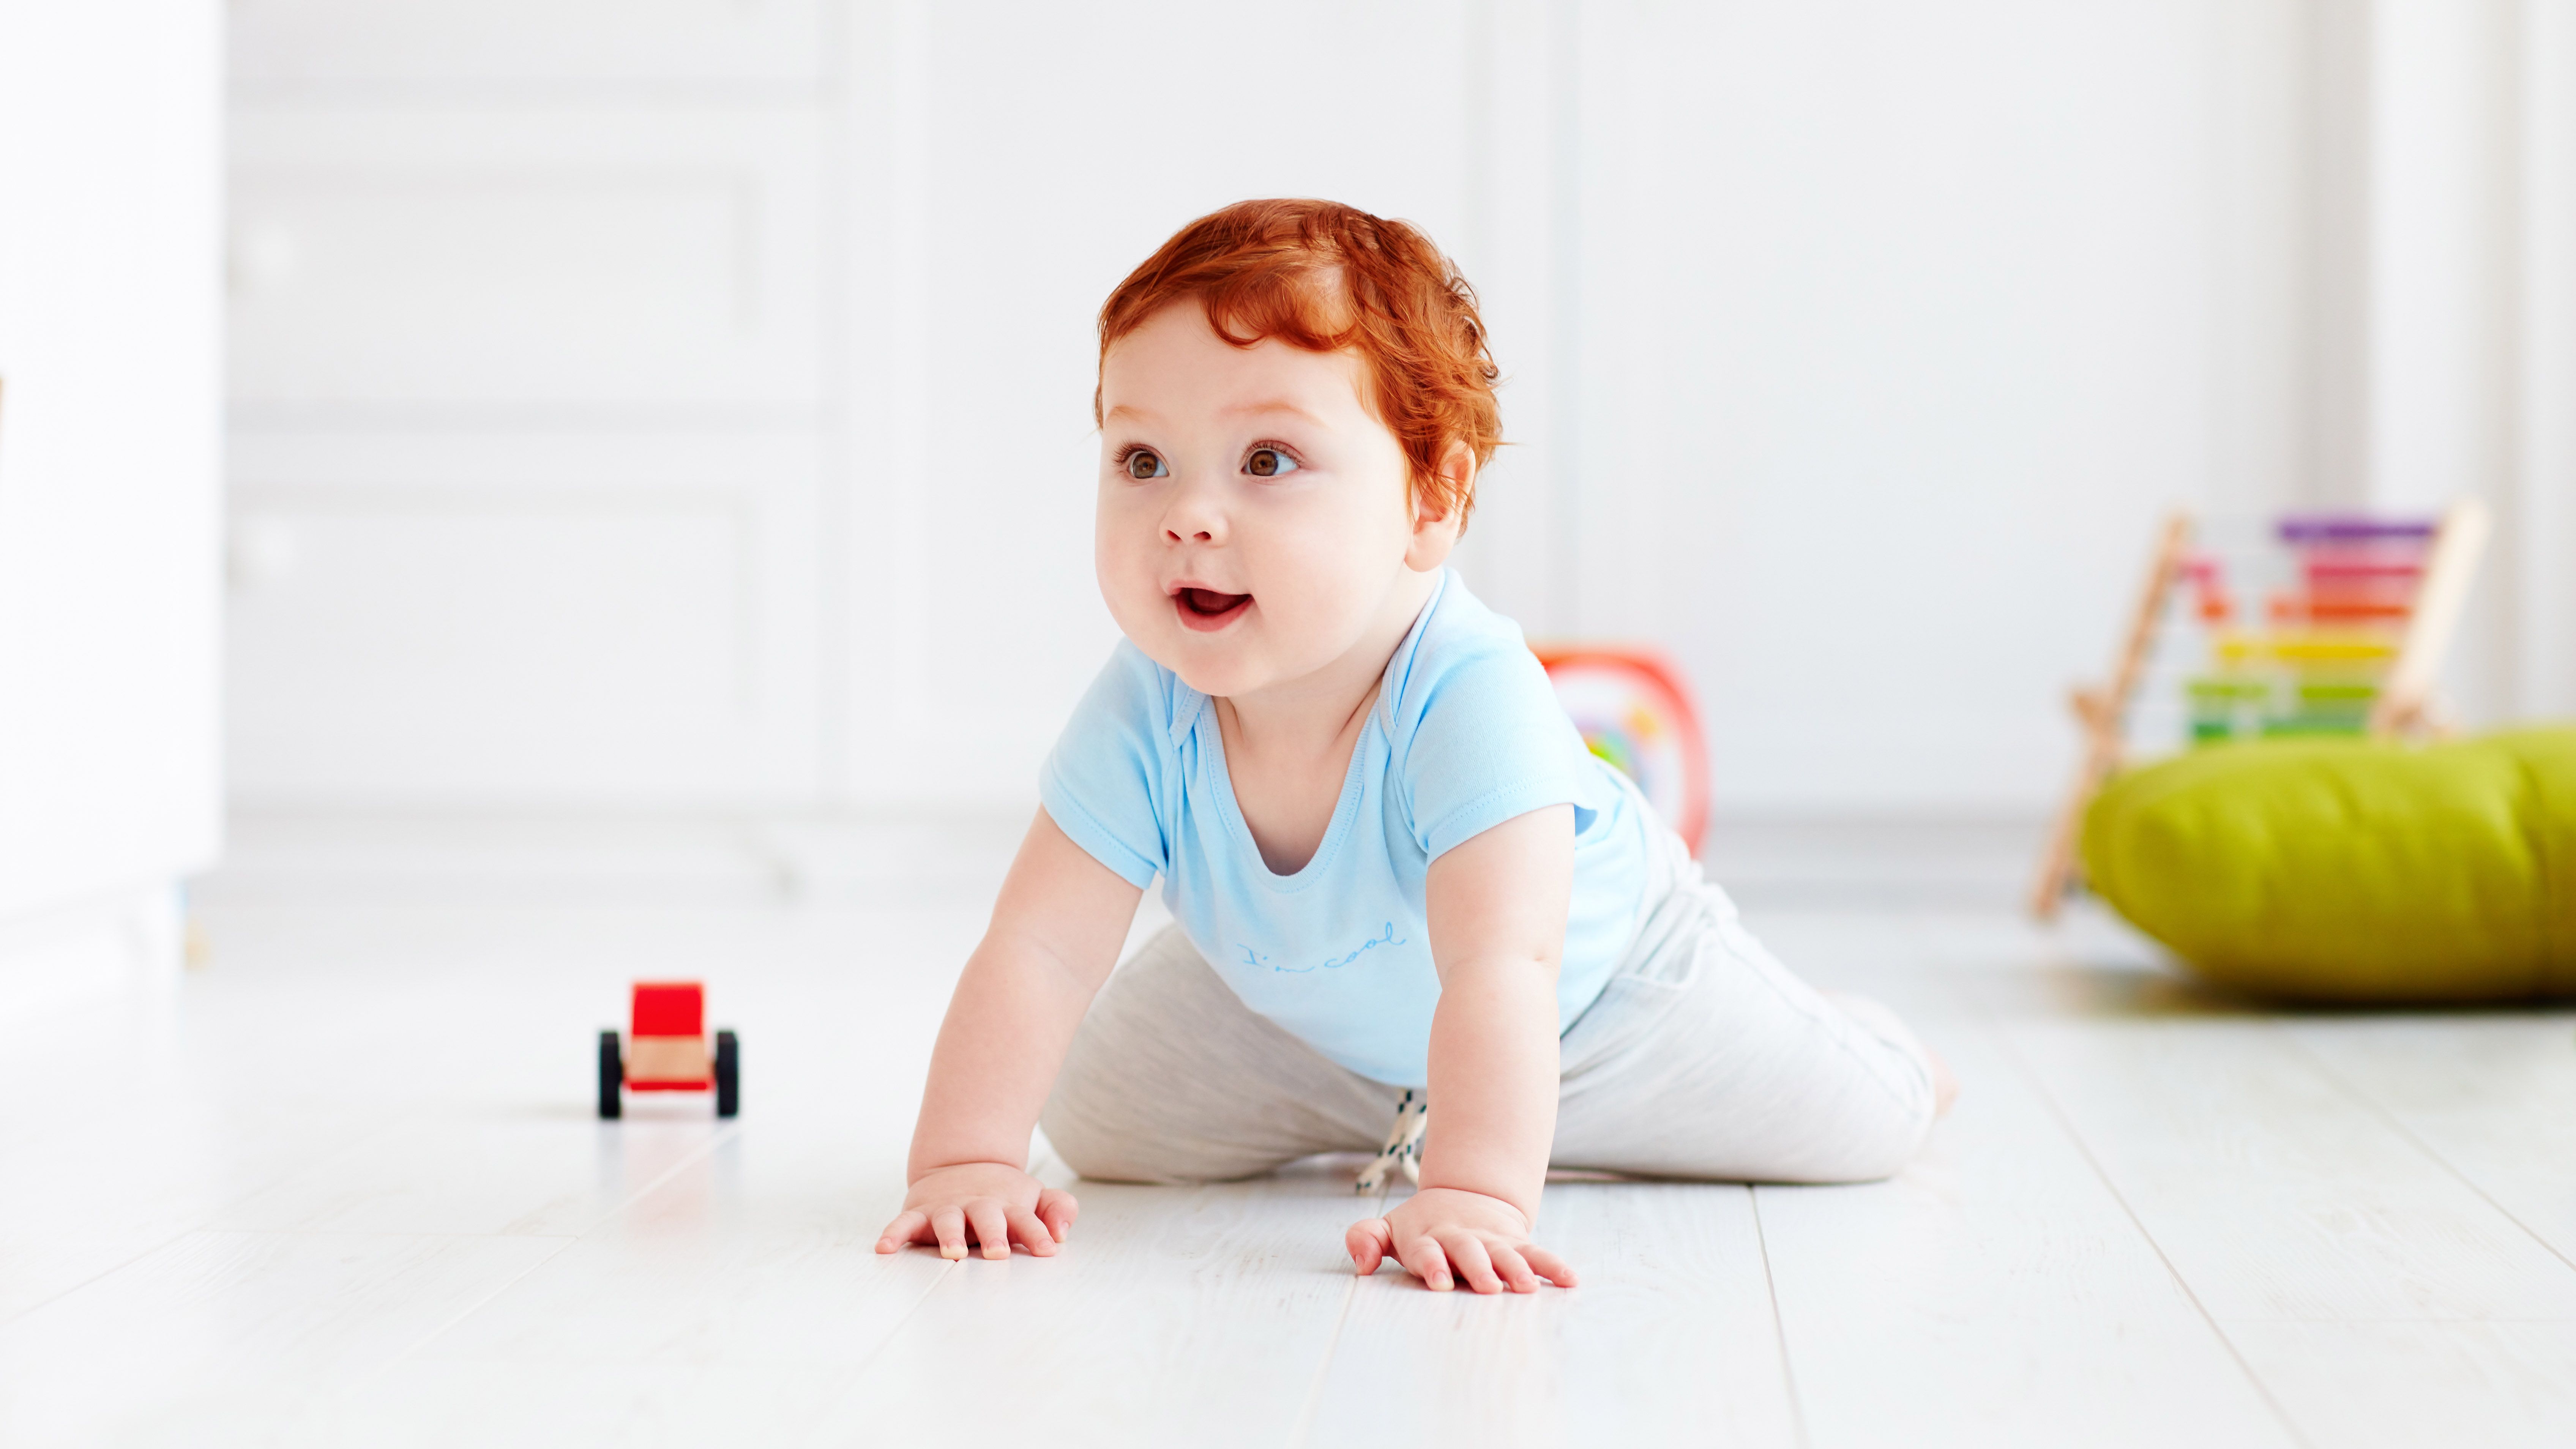 safe proofing your home for baby